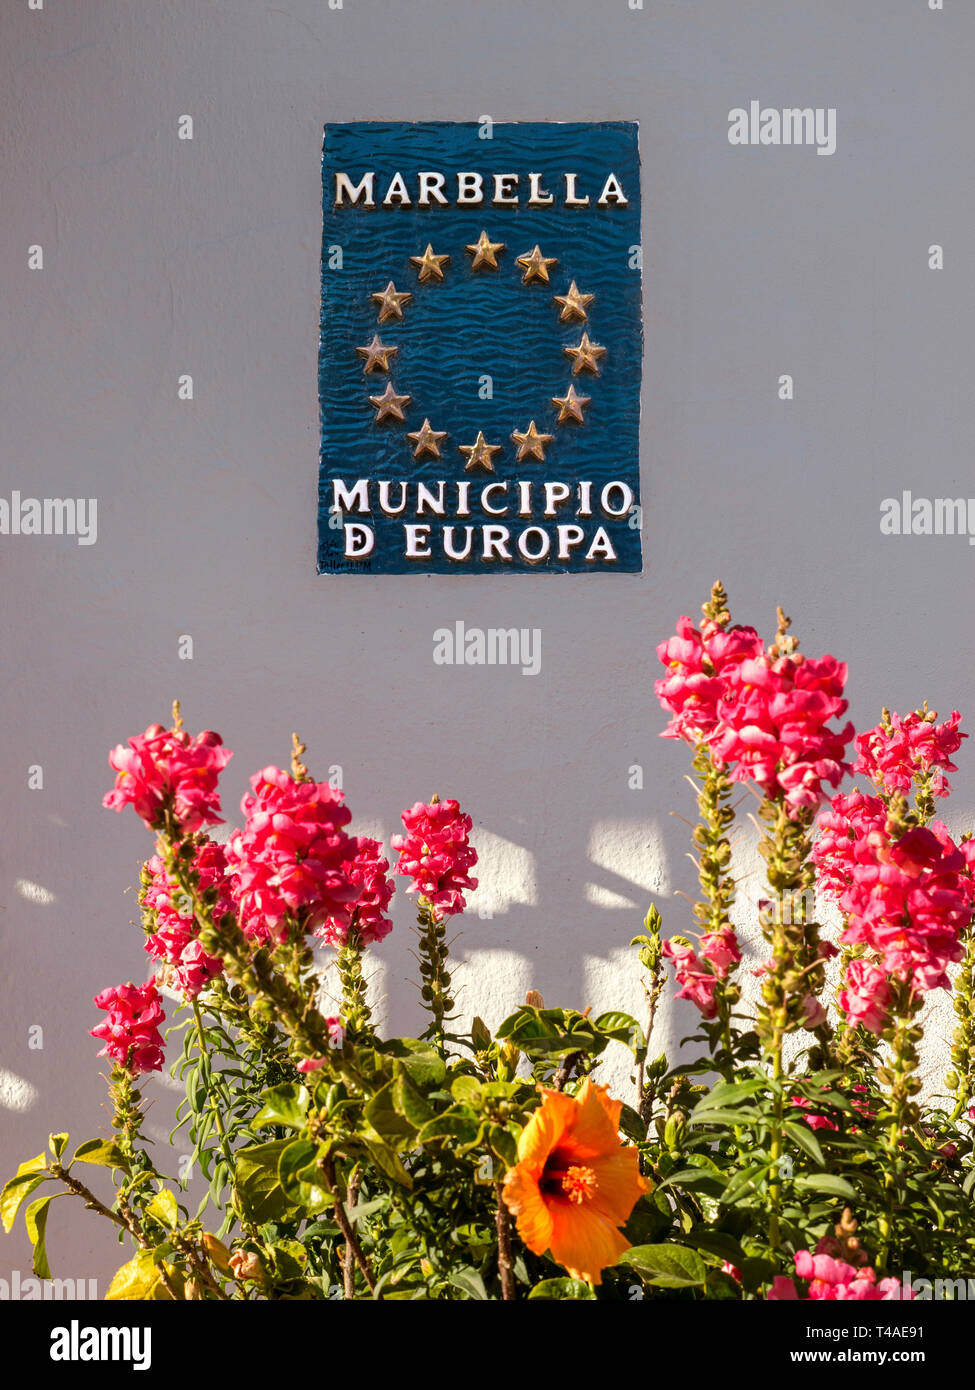 Marbella wall sign floral ’Municipio d Europa’ with EU stars, with   'Stock' Matthiola incana flowers surrounding a Hibiscus in foreground Marbella Stock Photo